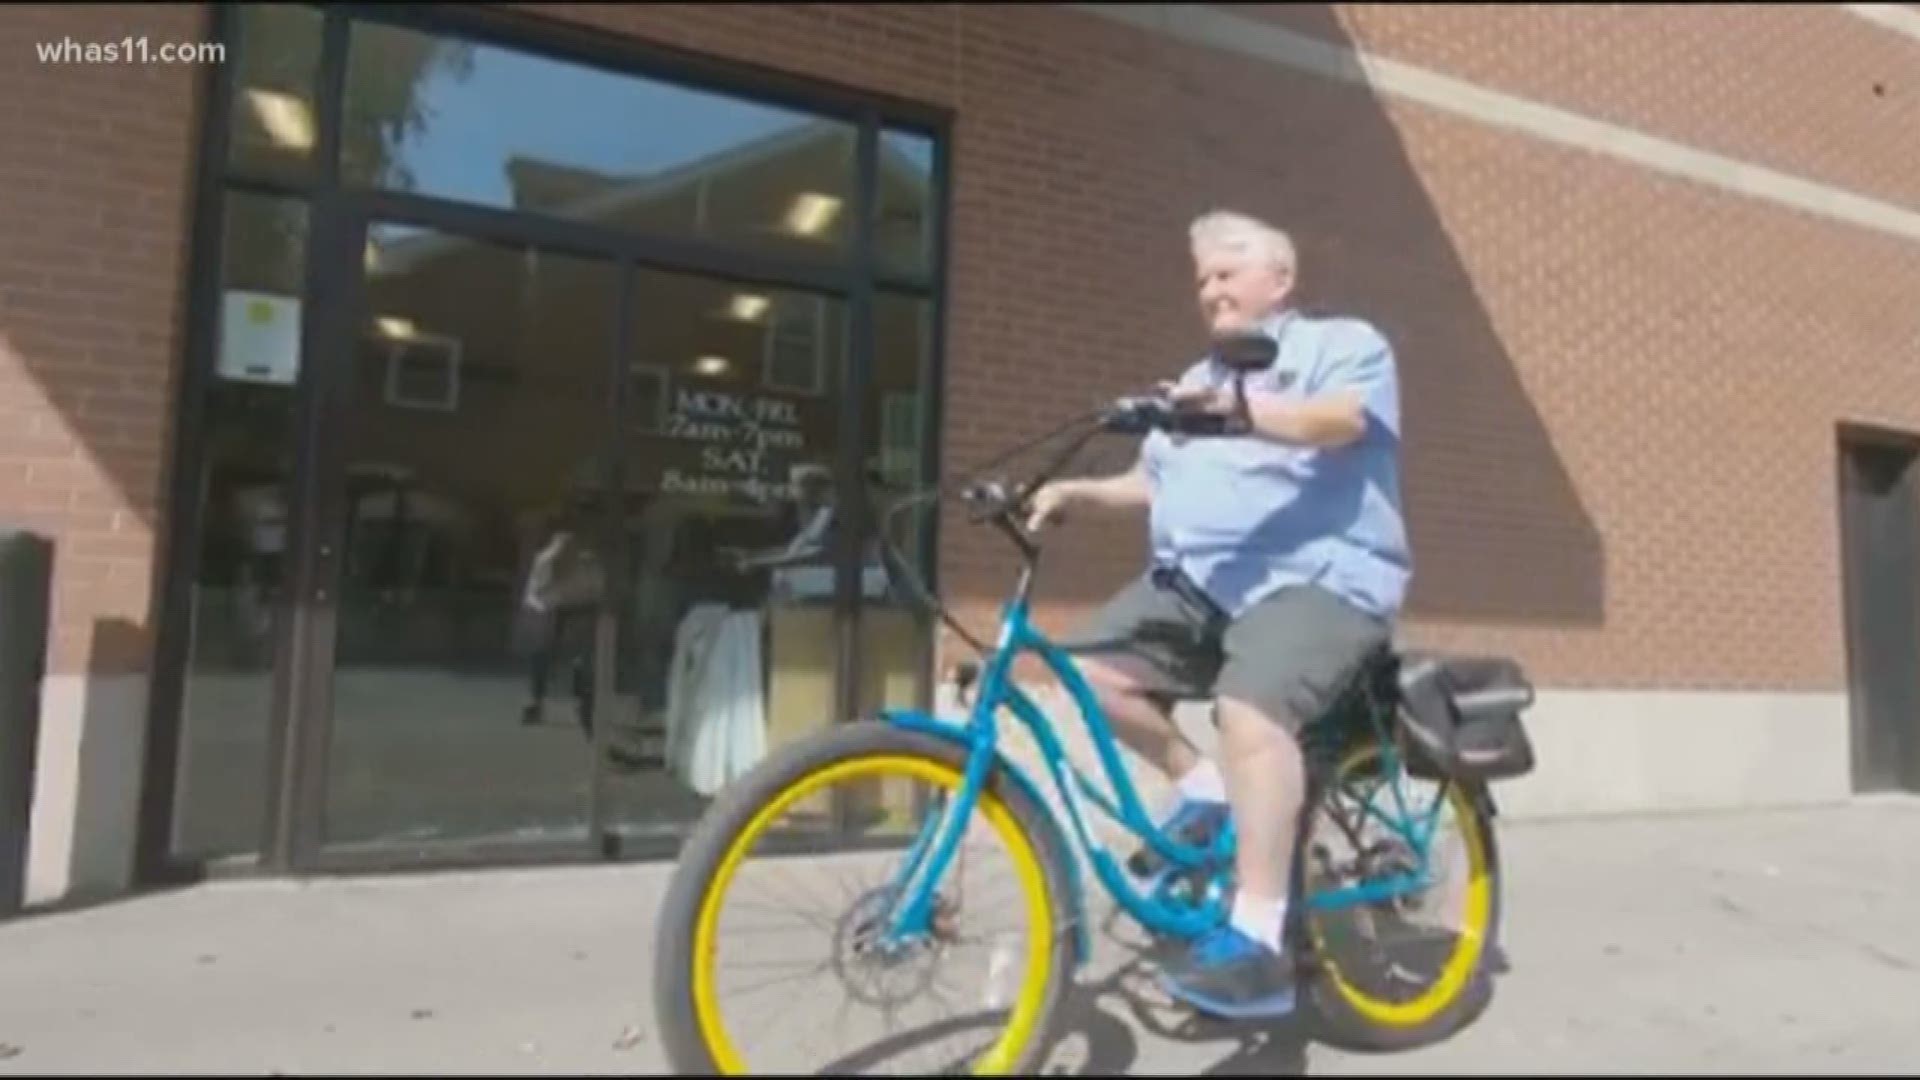 A new electric bike shop has opened in Louisville